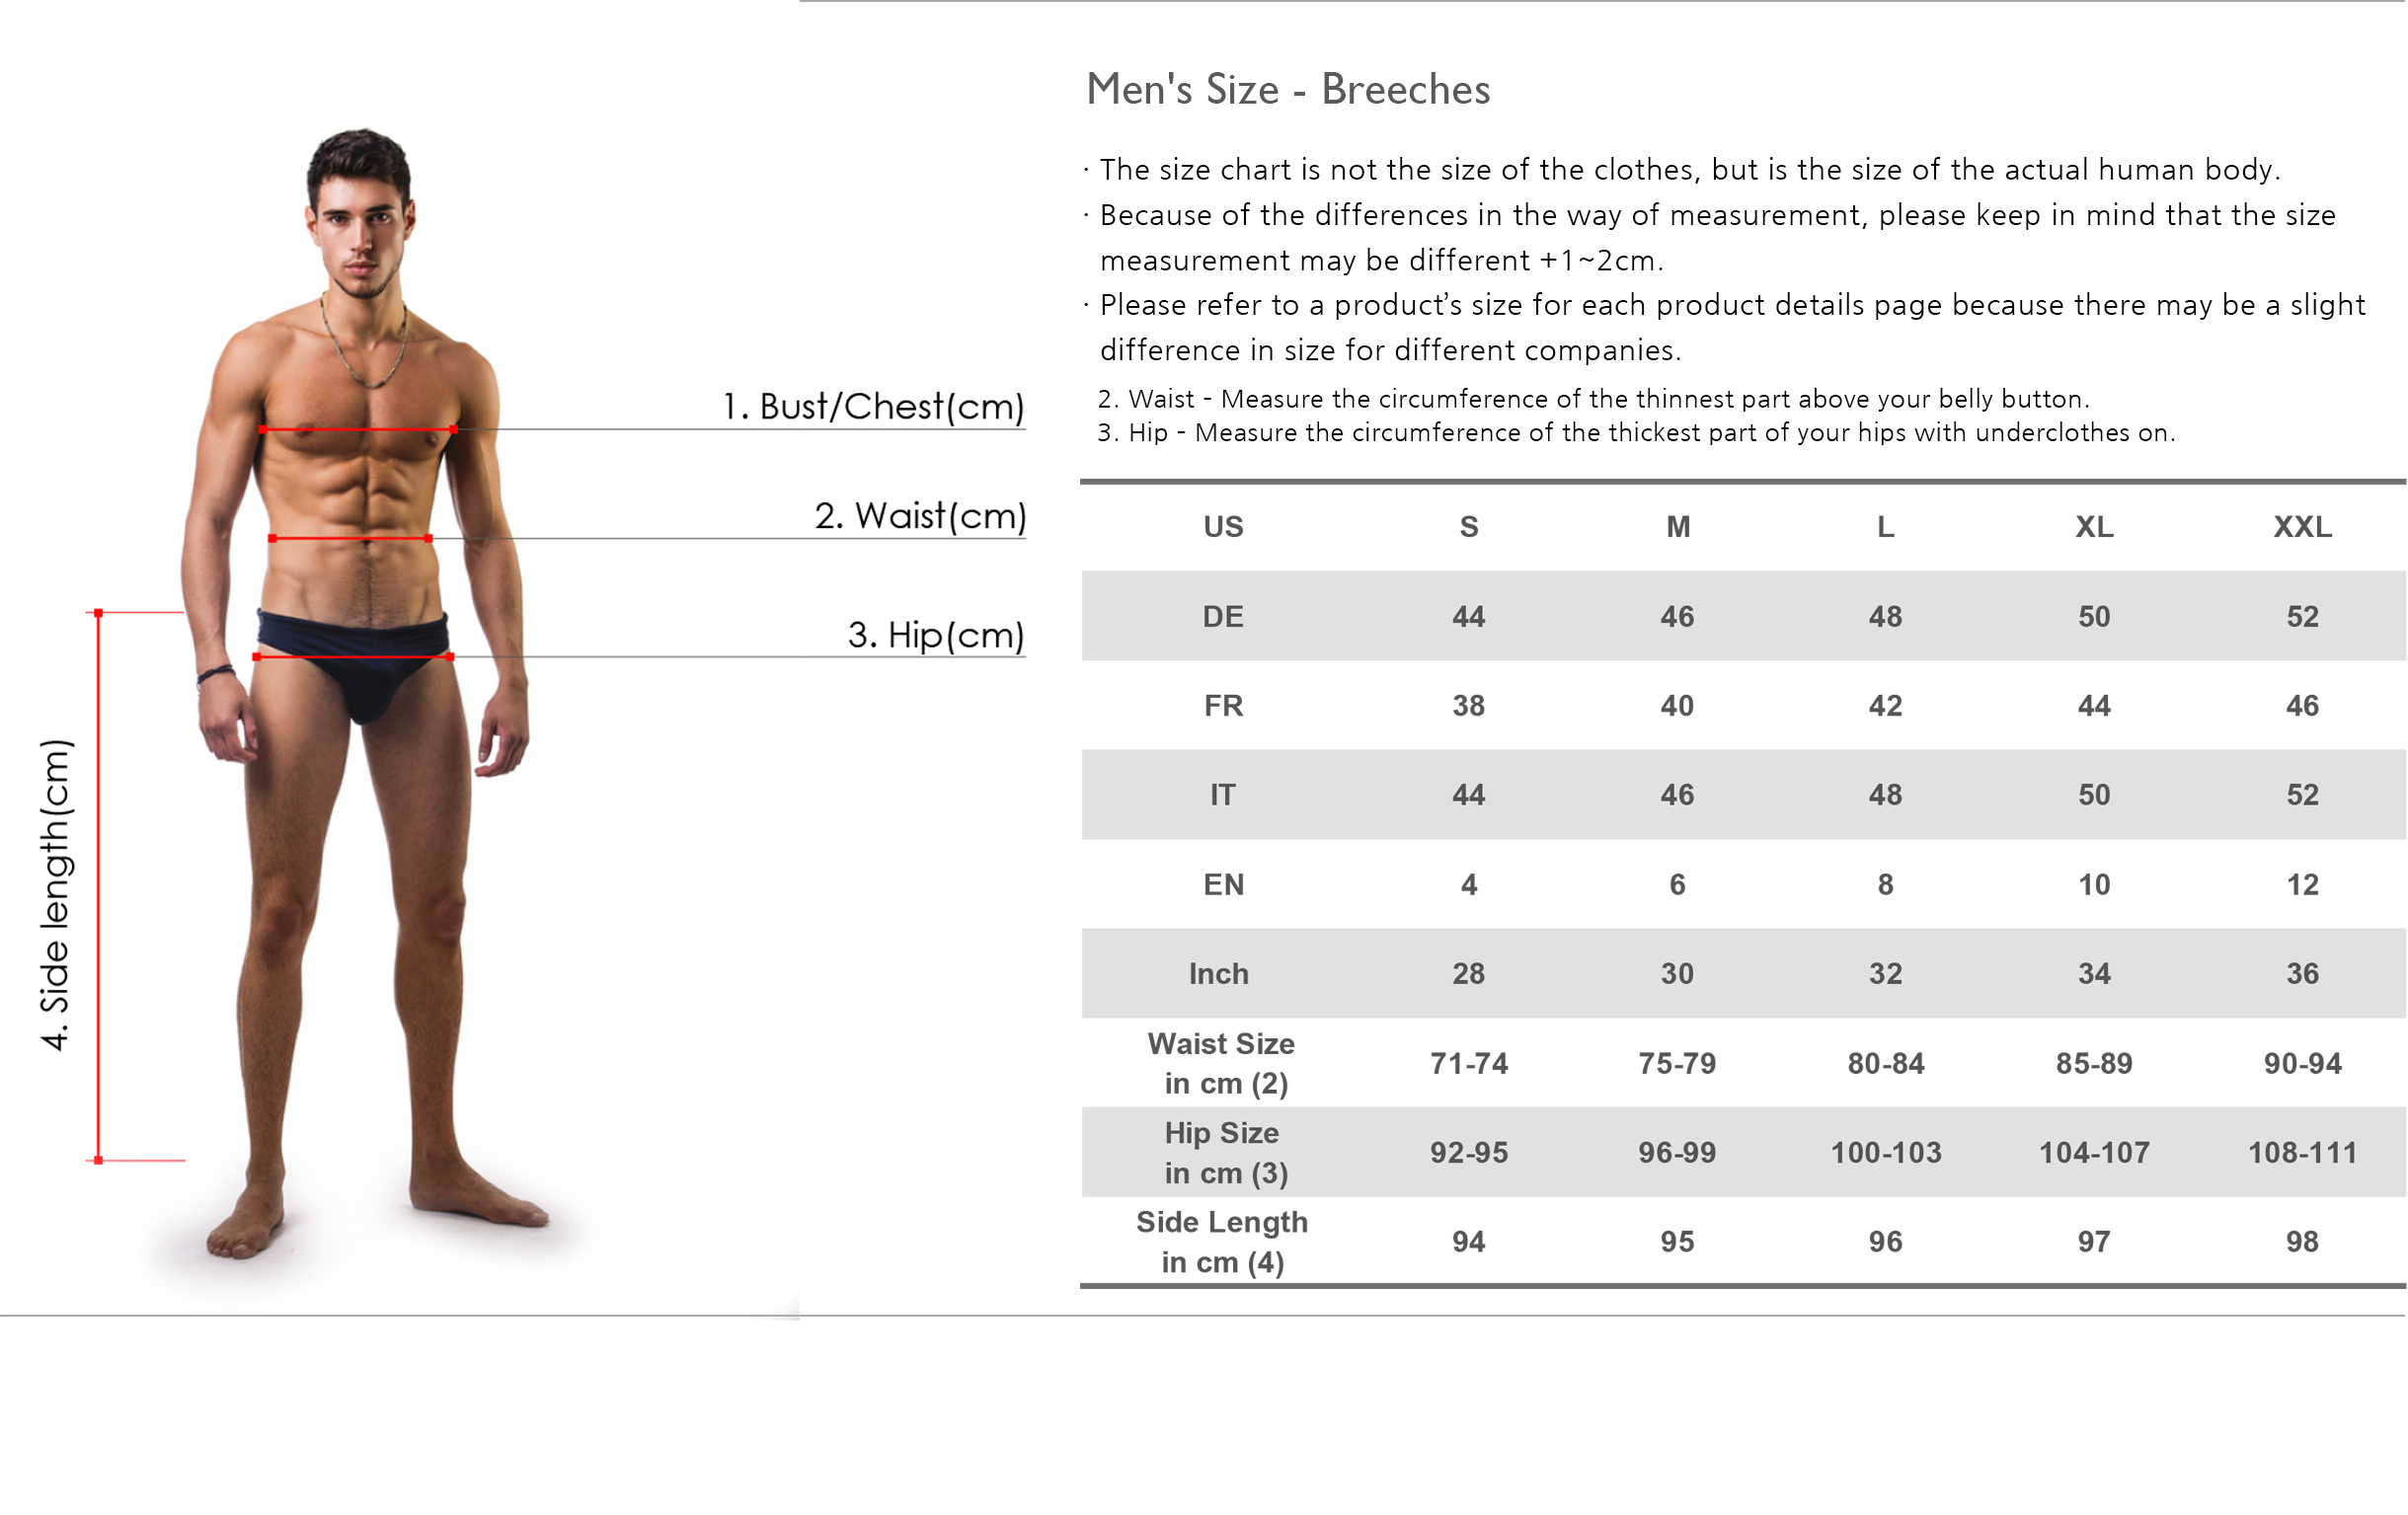 Equiline Breeches Size Chart